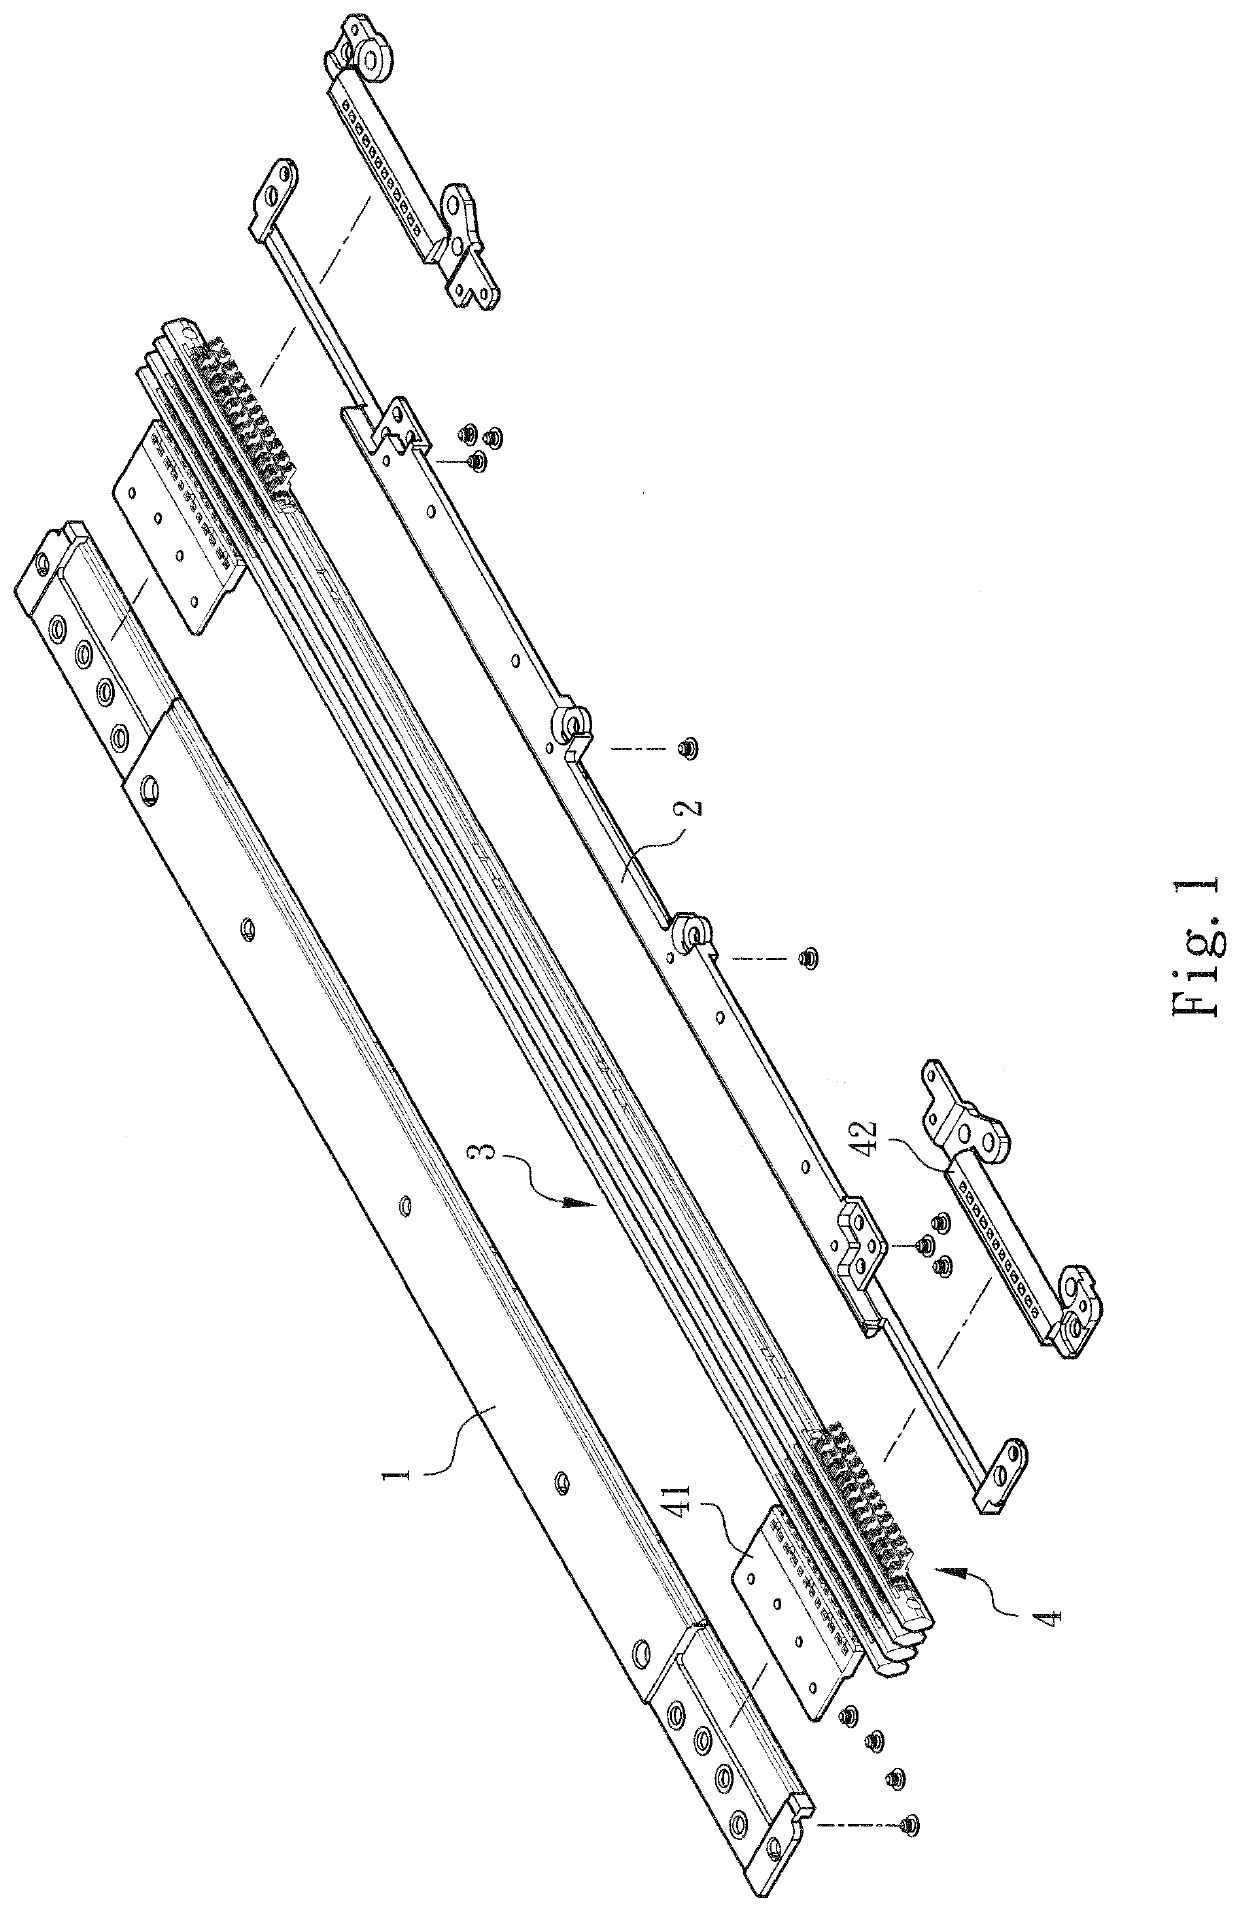 Rotary shaft link assembly structure